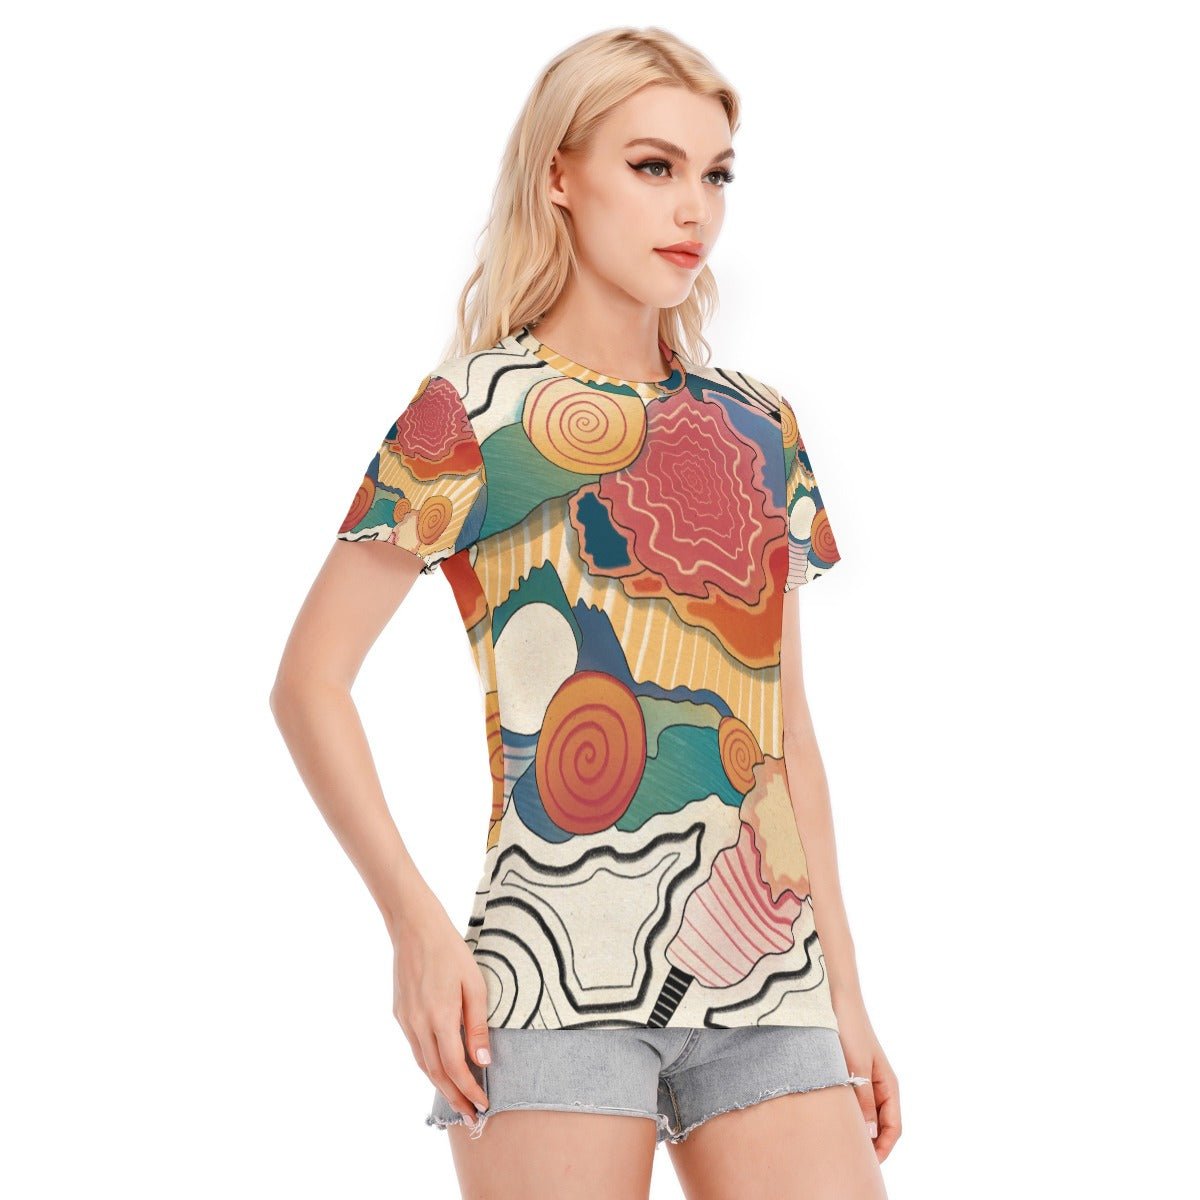 "Lost In Transition" - Women's T-Shirt | T-Shirts | All Around Artsy Fashion